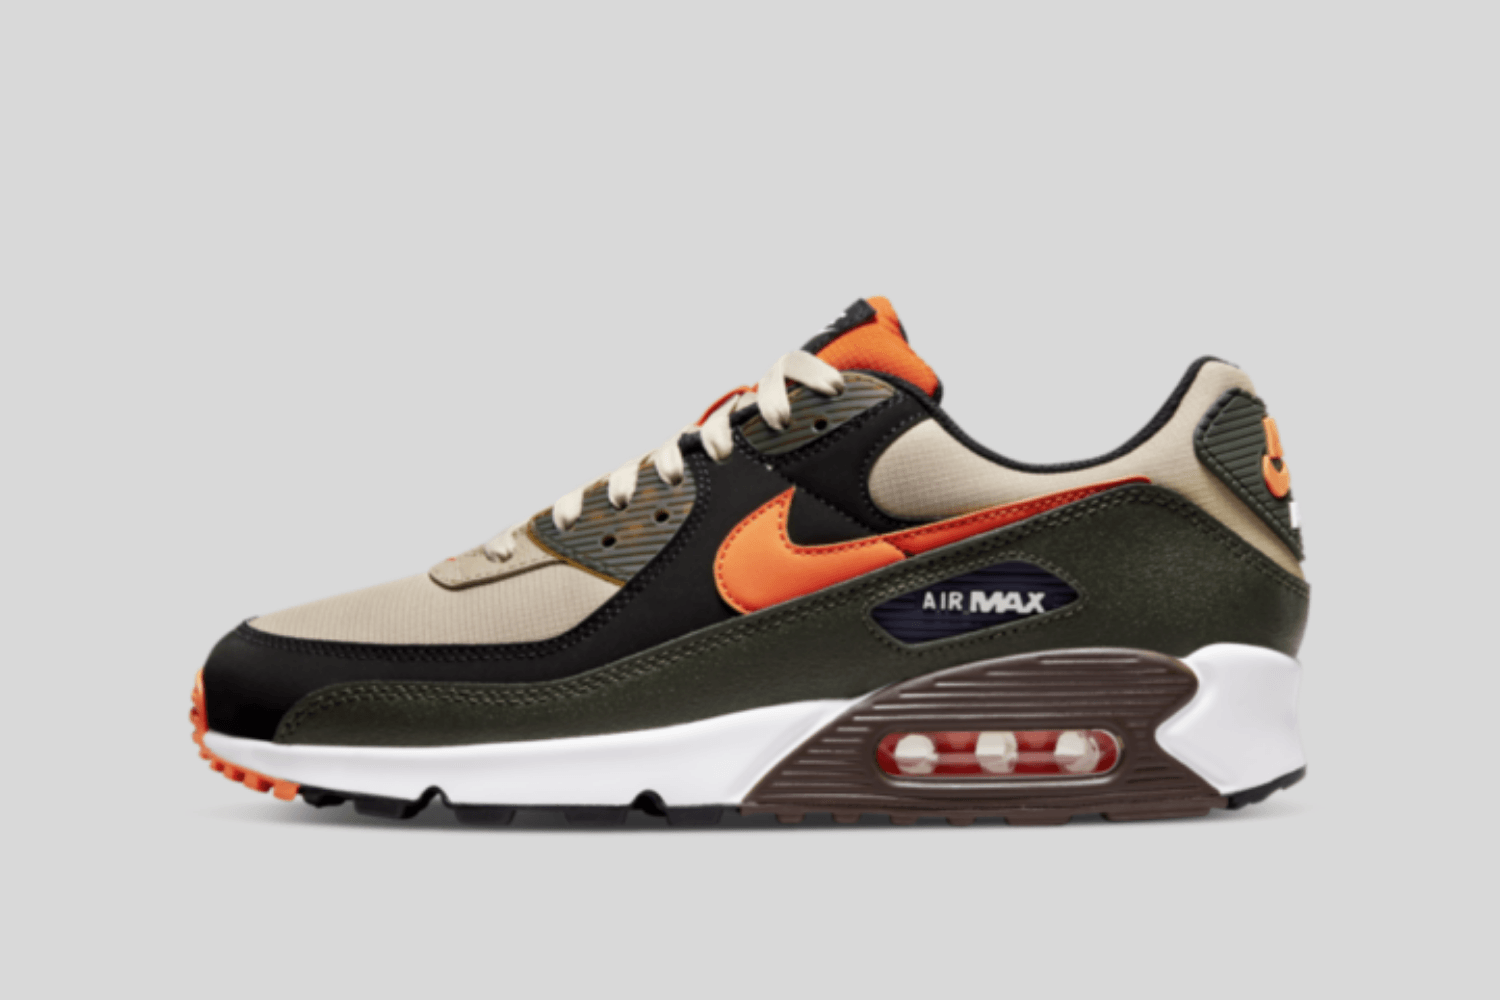 The Nike Air Max 90 comes in a 'Buck Hunter' colorway